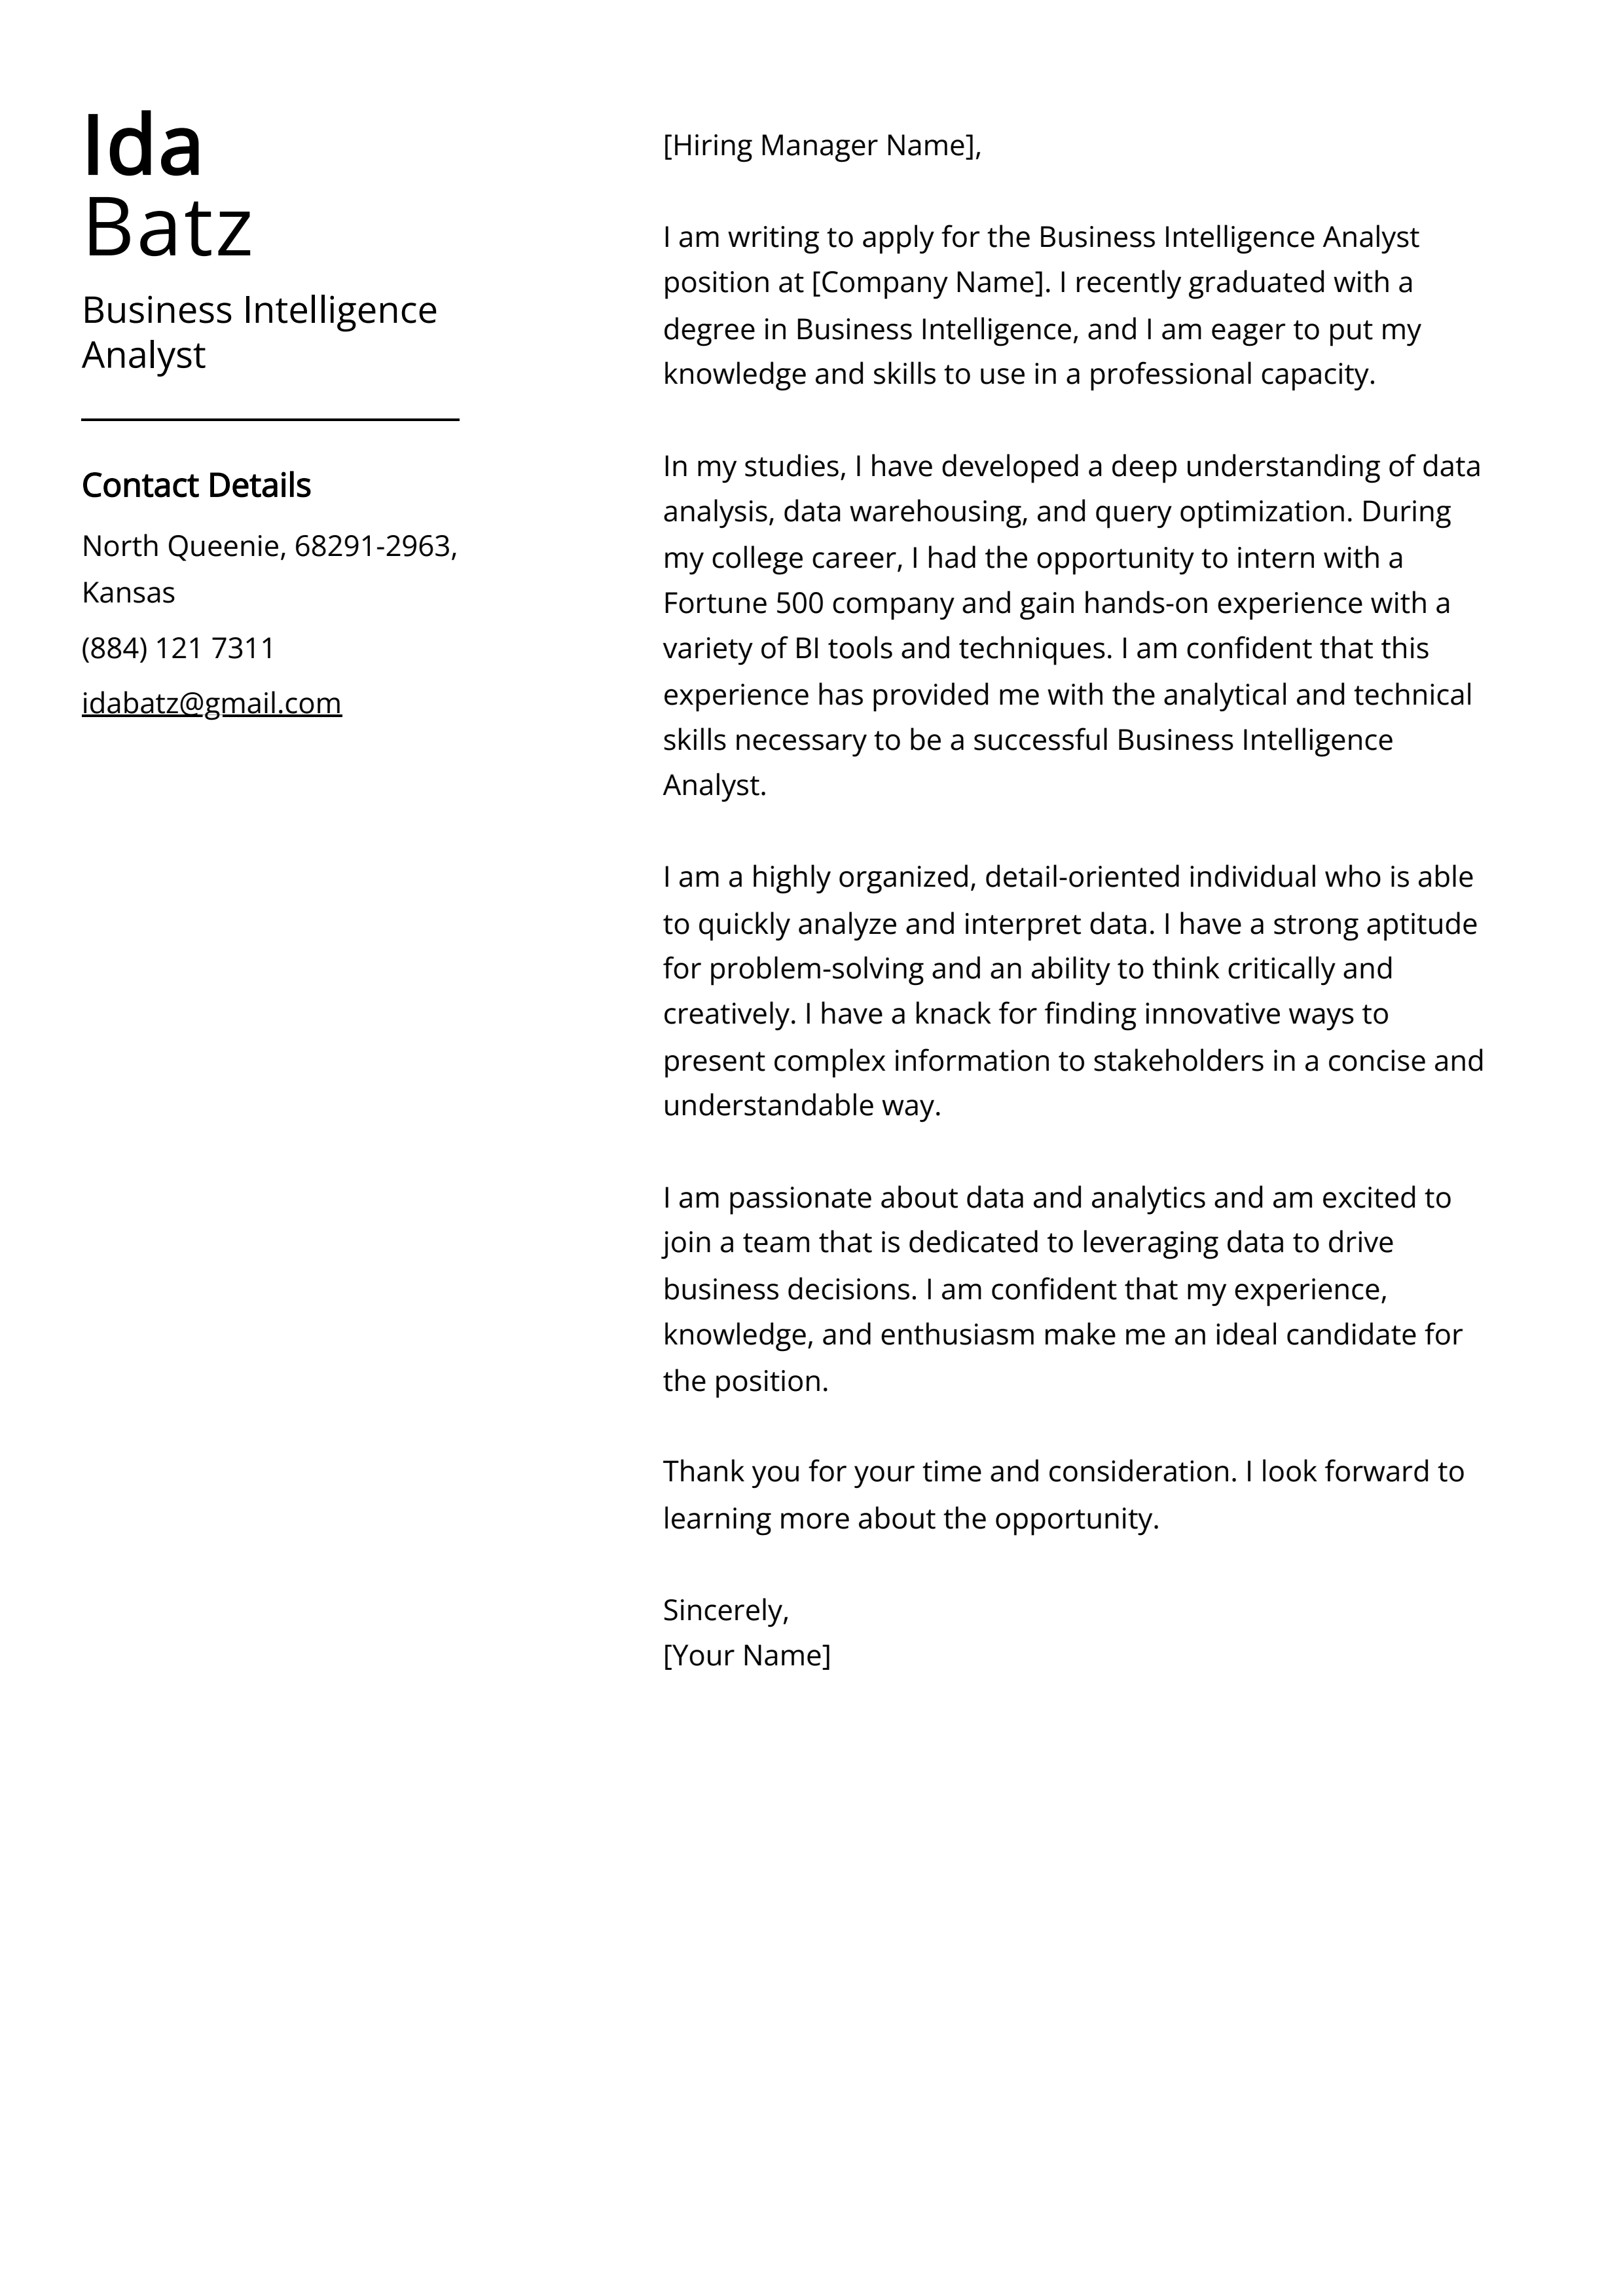 Business Intelligence Analyst Cover Letter Example